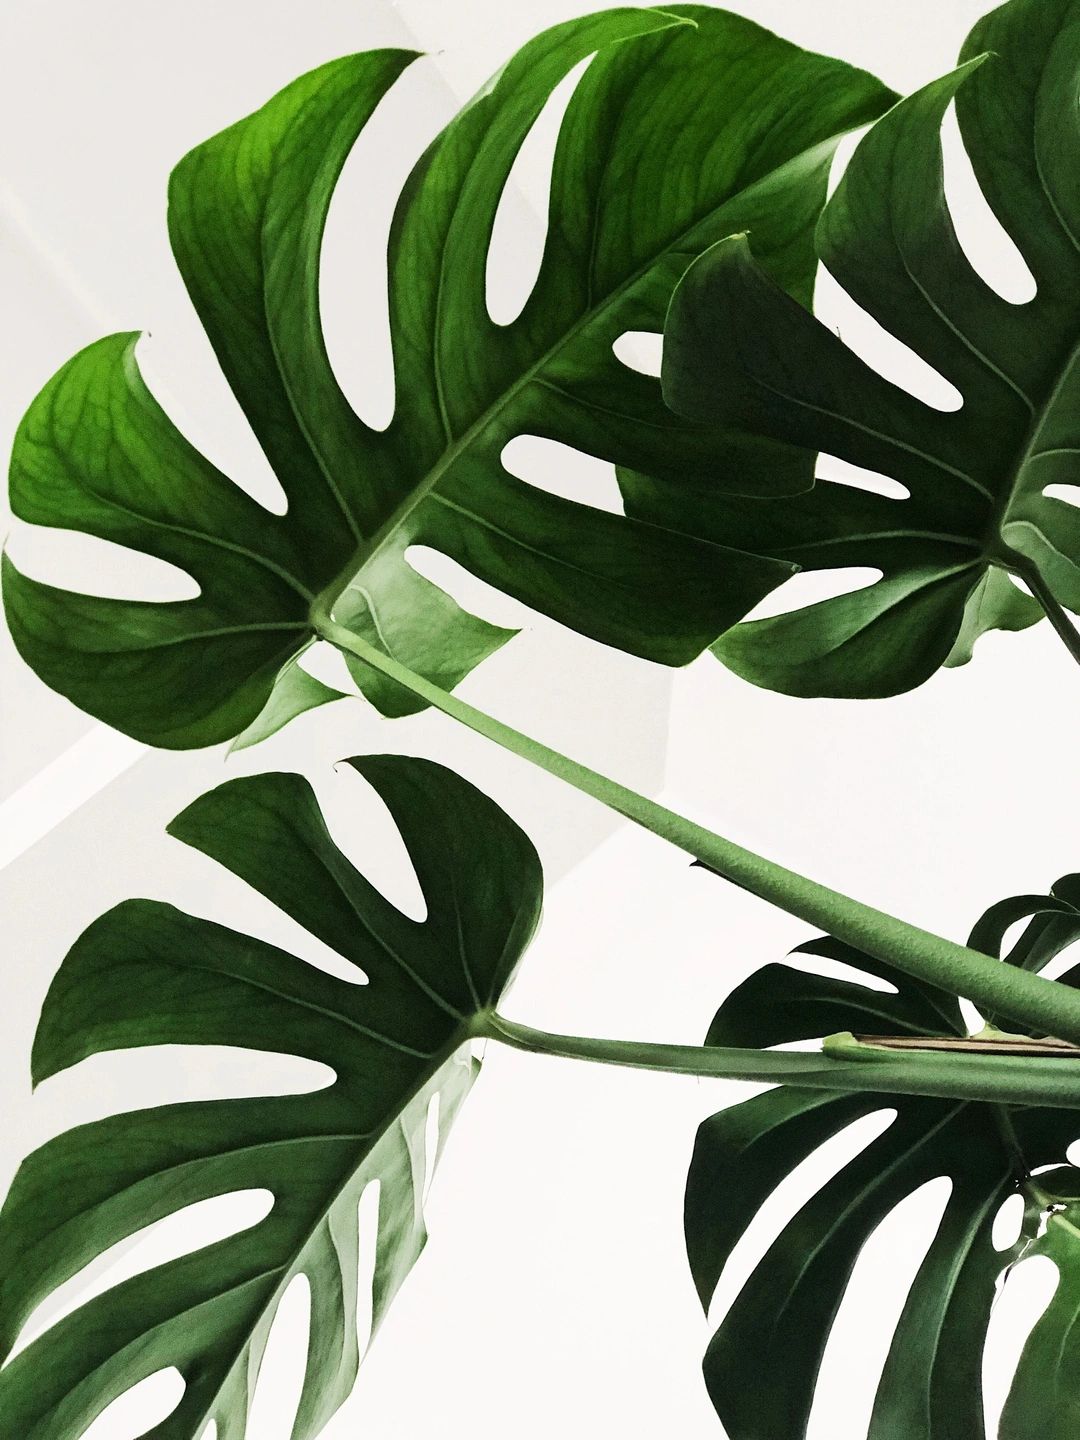 Discover The Houseplants That Can Deter Insects From Your Home